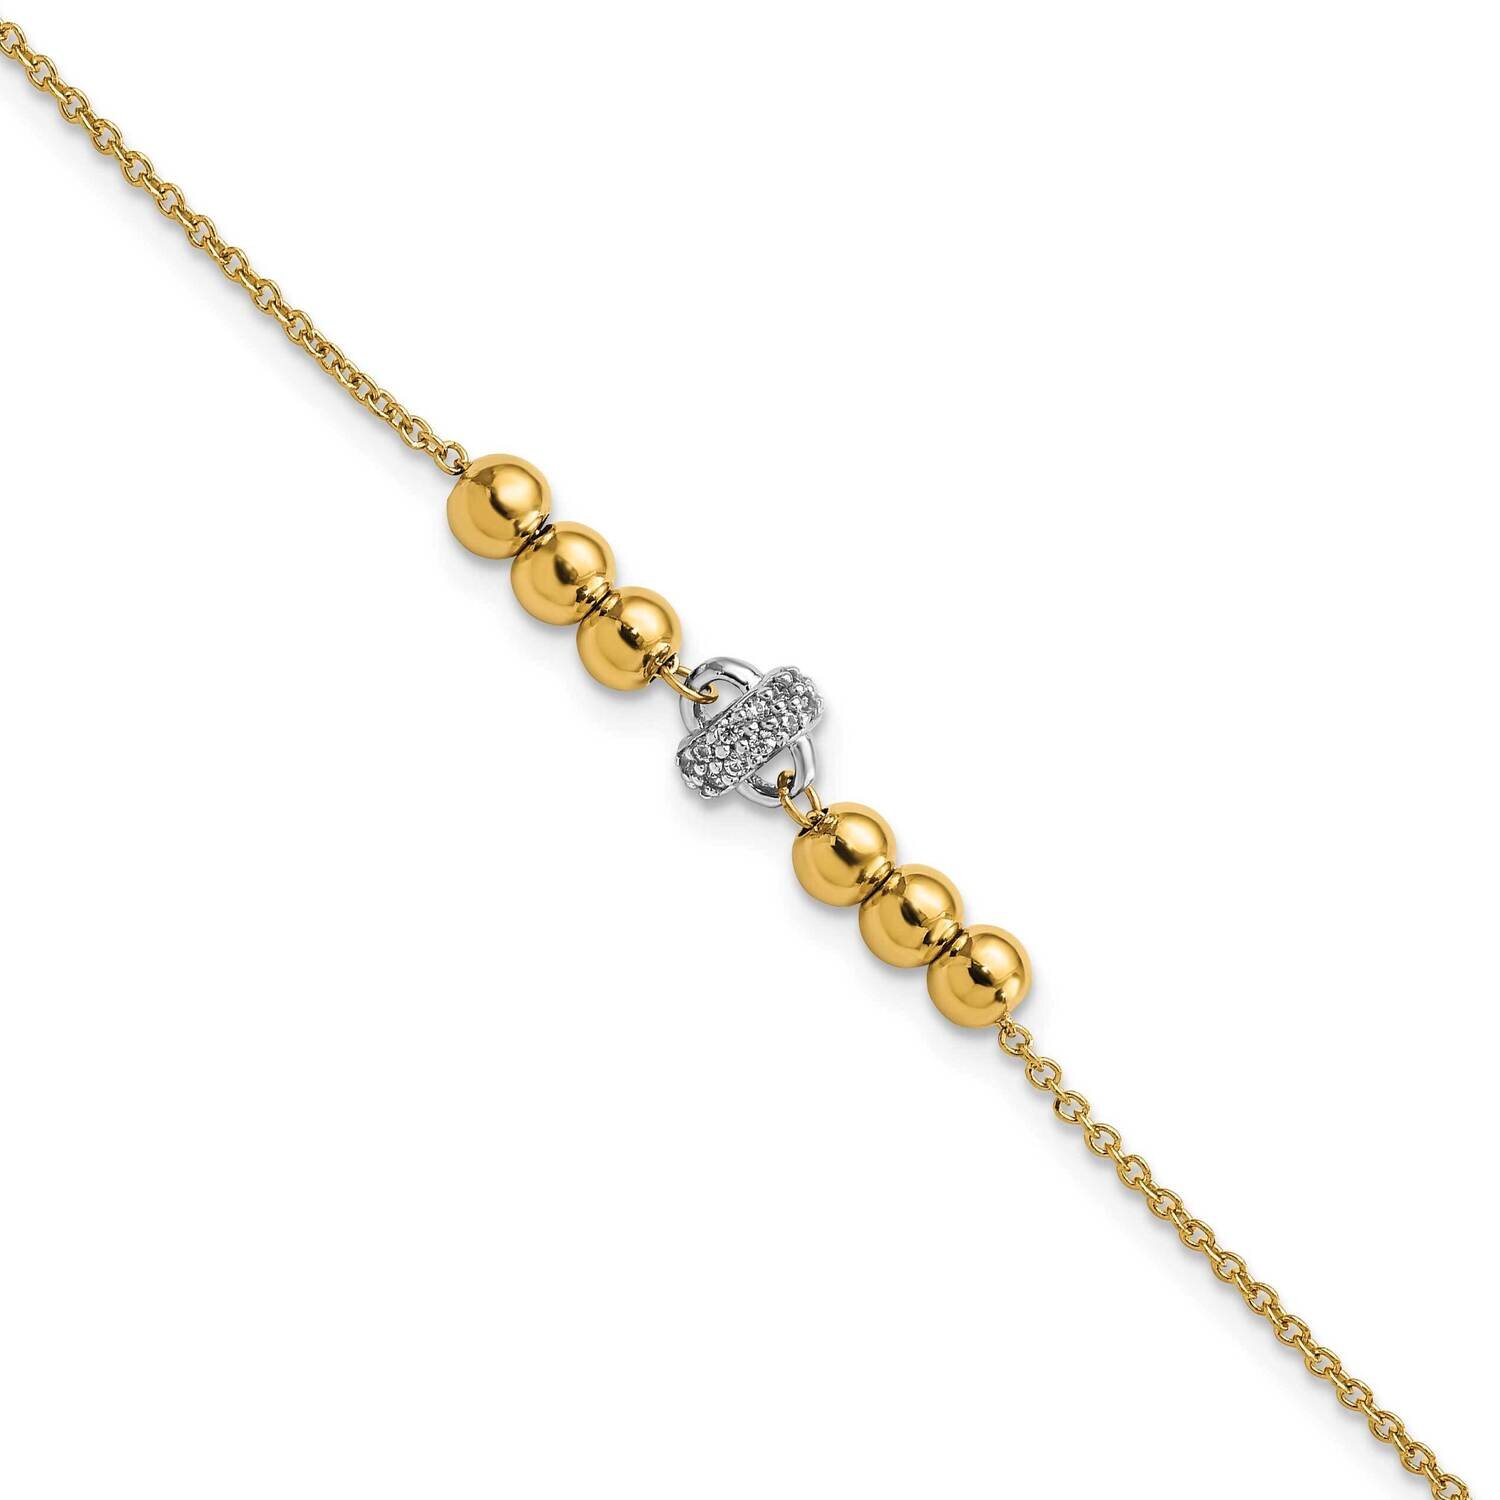 Beads & CZ Diamond with .75 In Extender Bracelet 14k Two-Tone Gold Polished SF2861-7